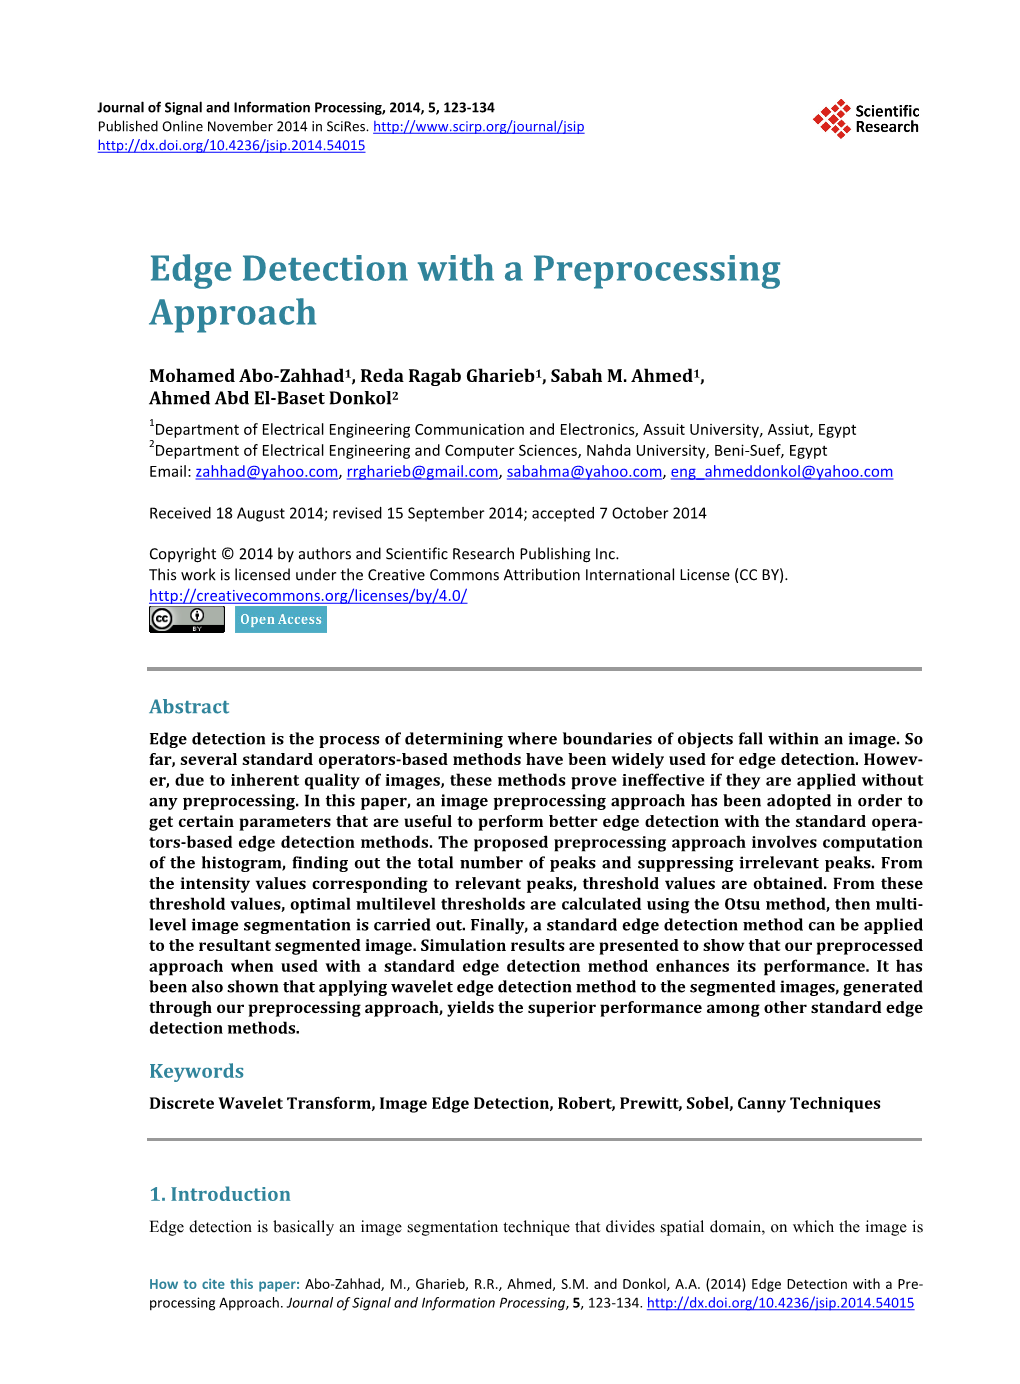 Edge Detection with a Preprocessing Approach